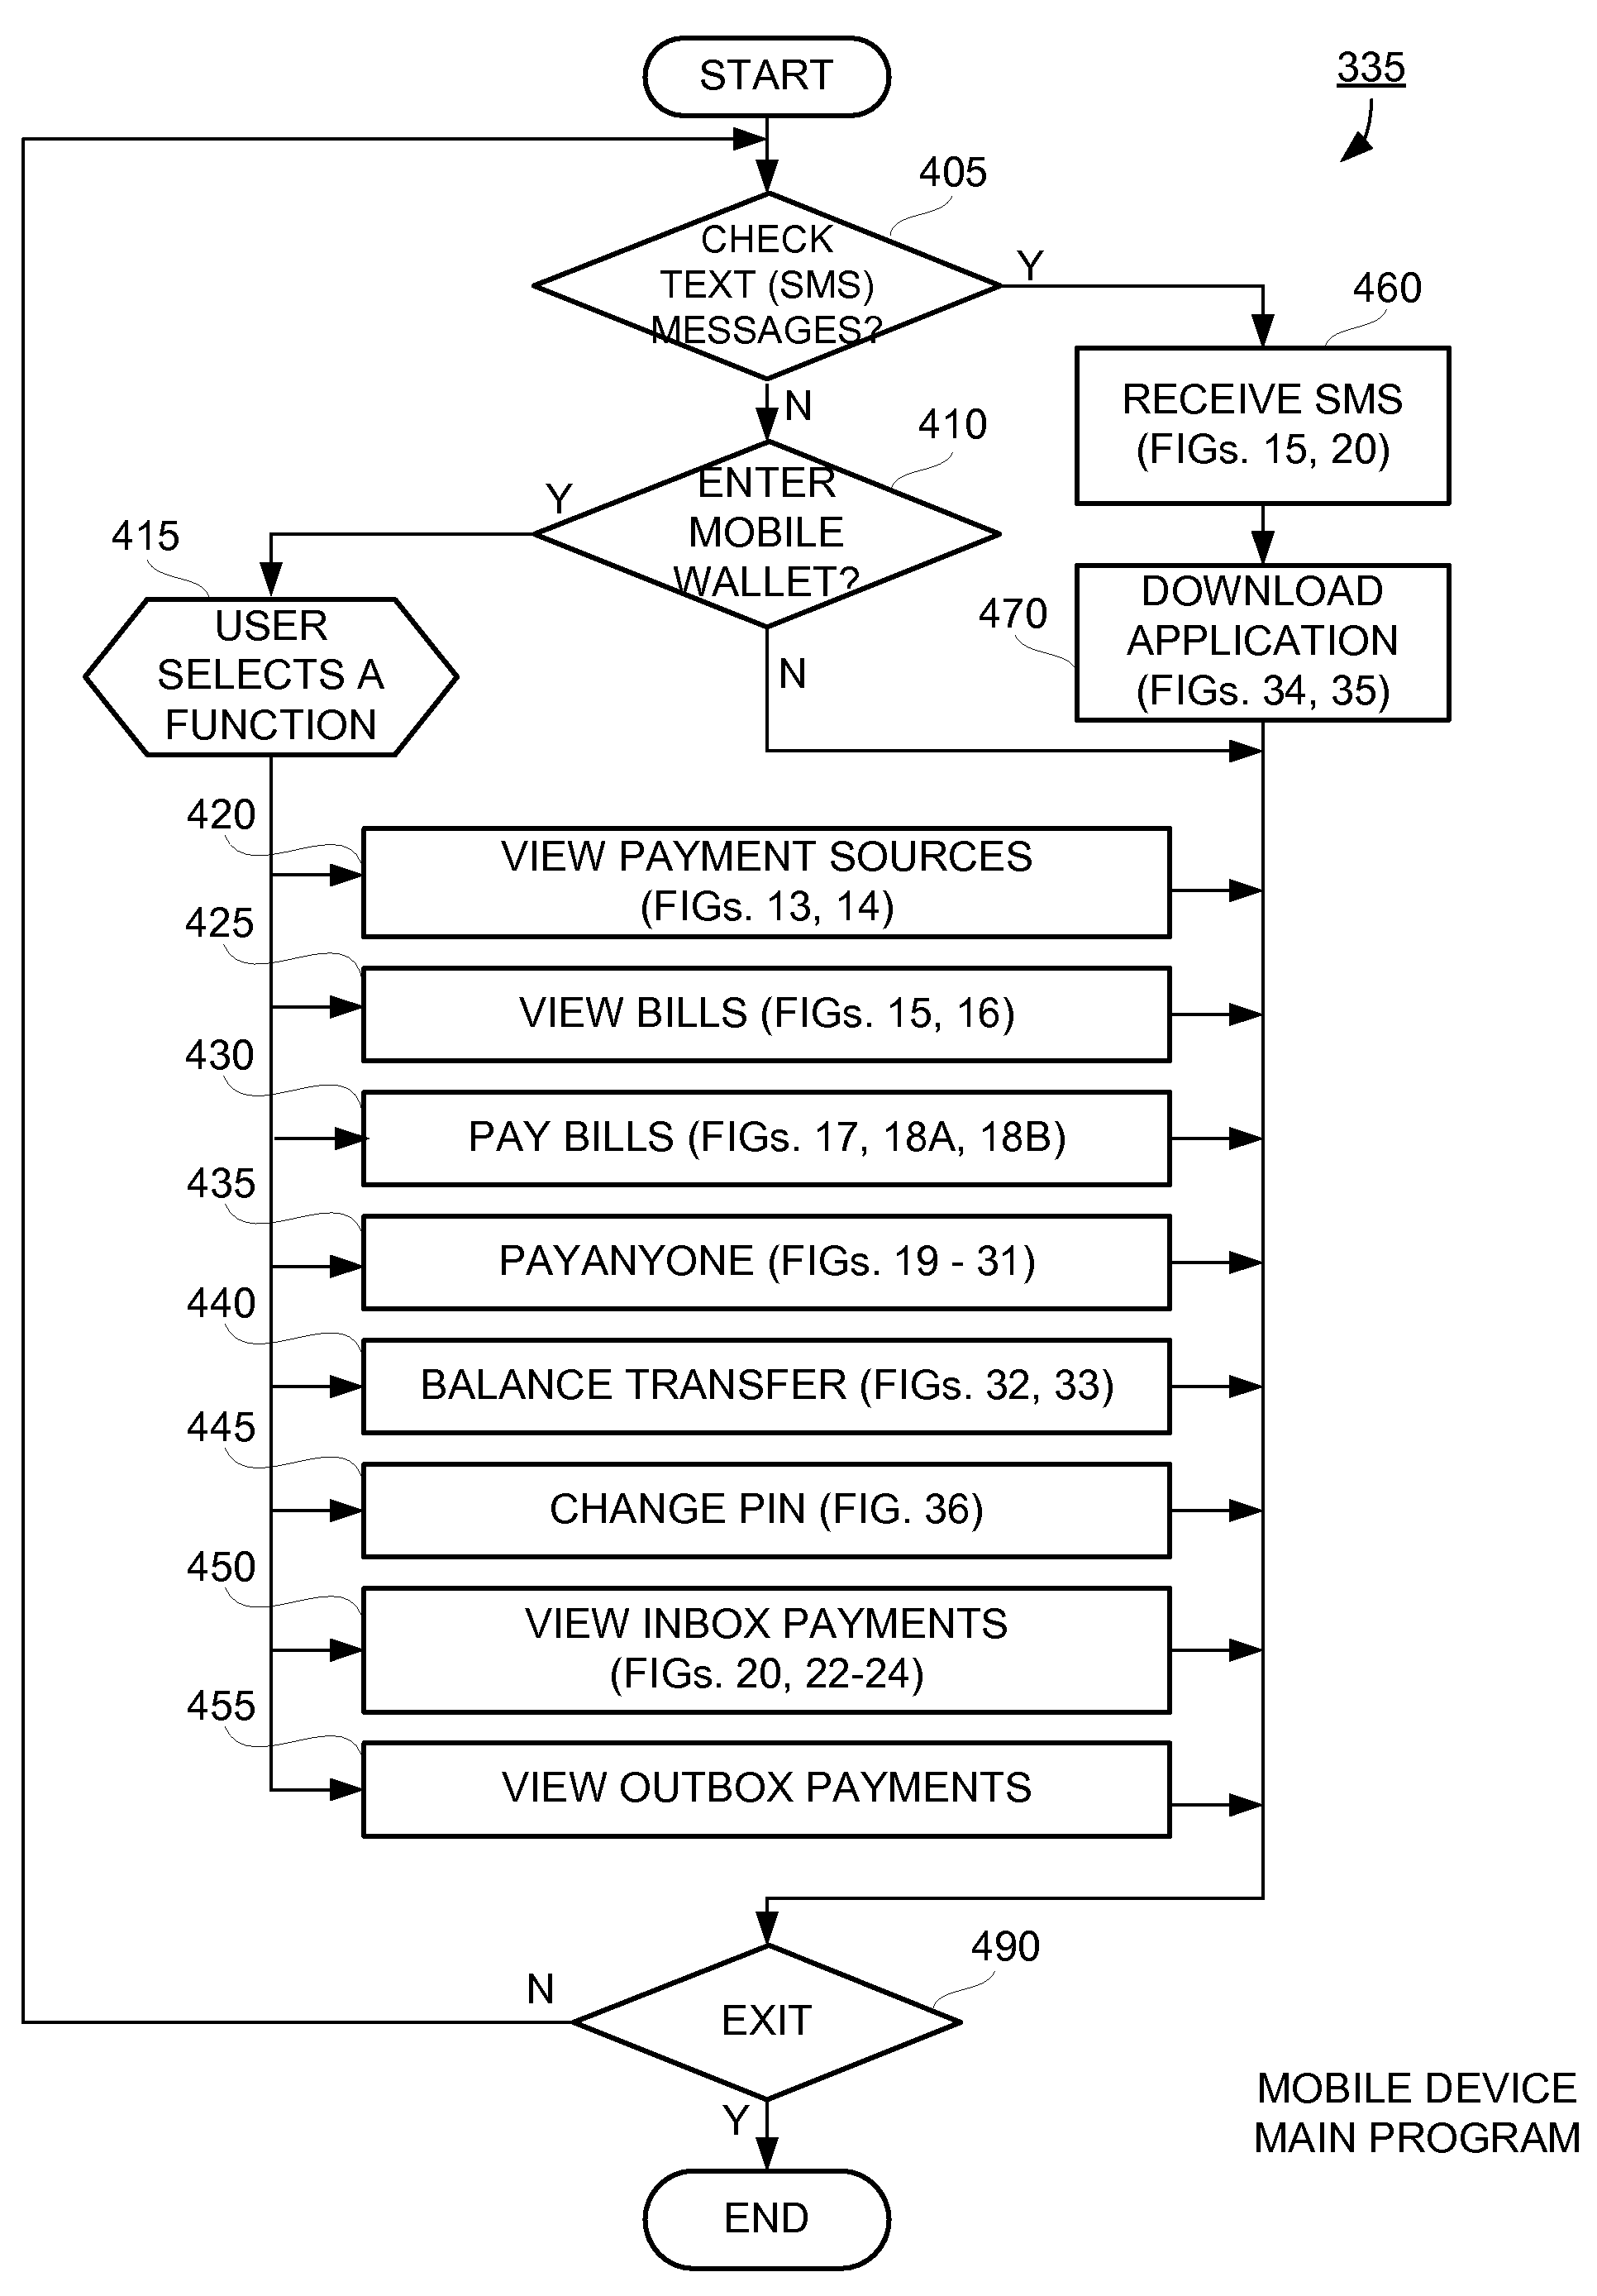 Methods and Systems For Distribution of a Mobile Wallet for a Mobile Device